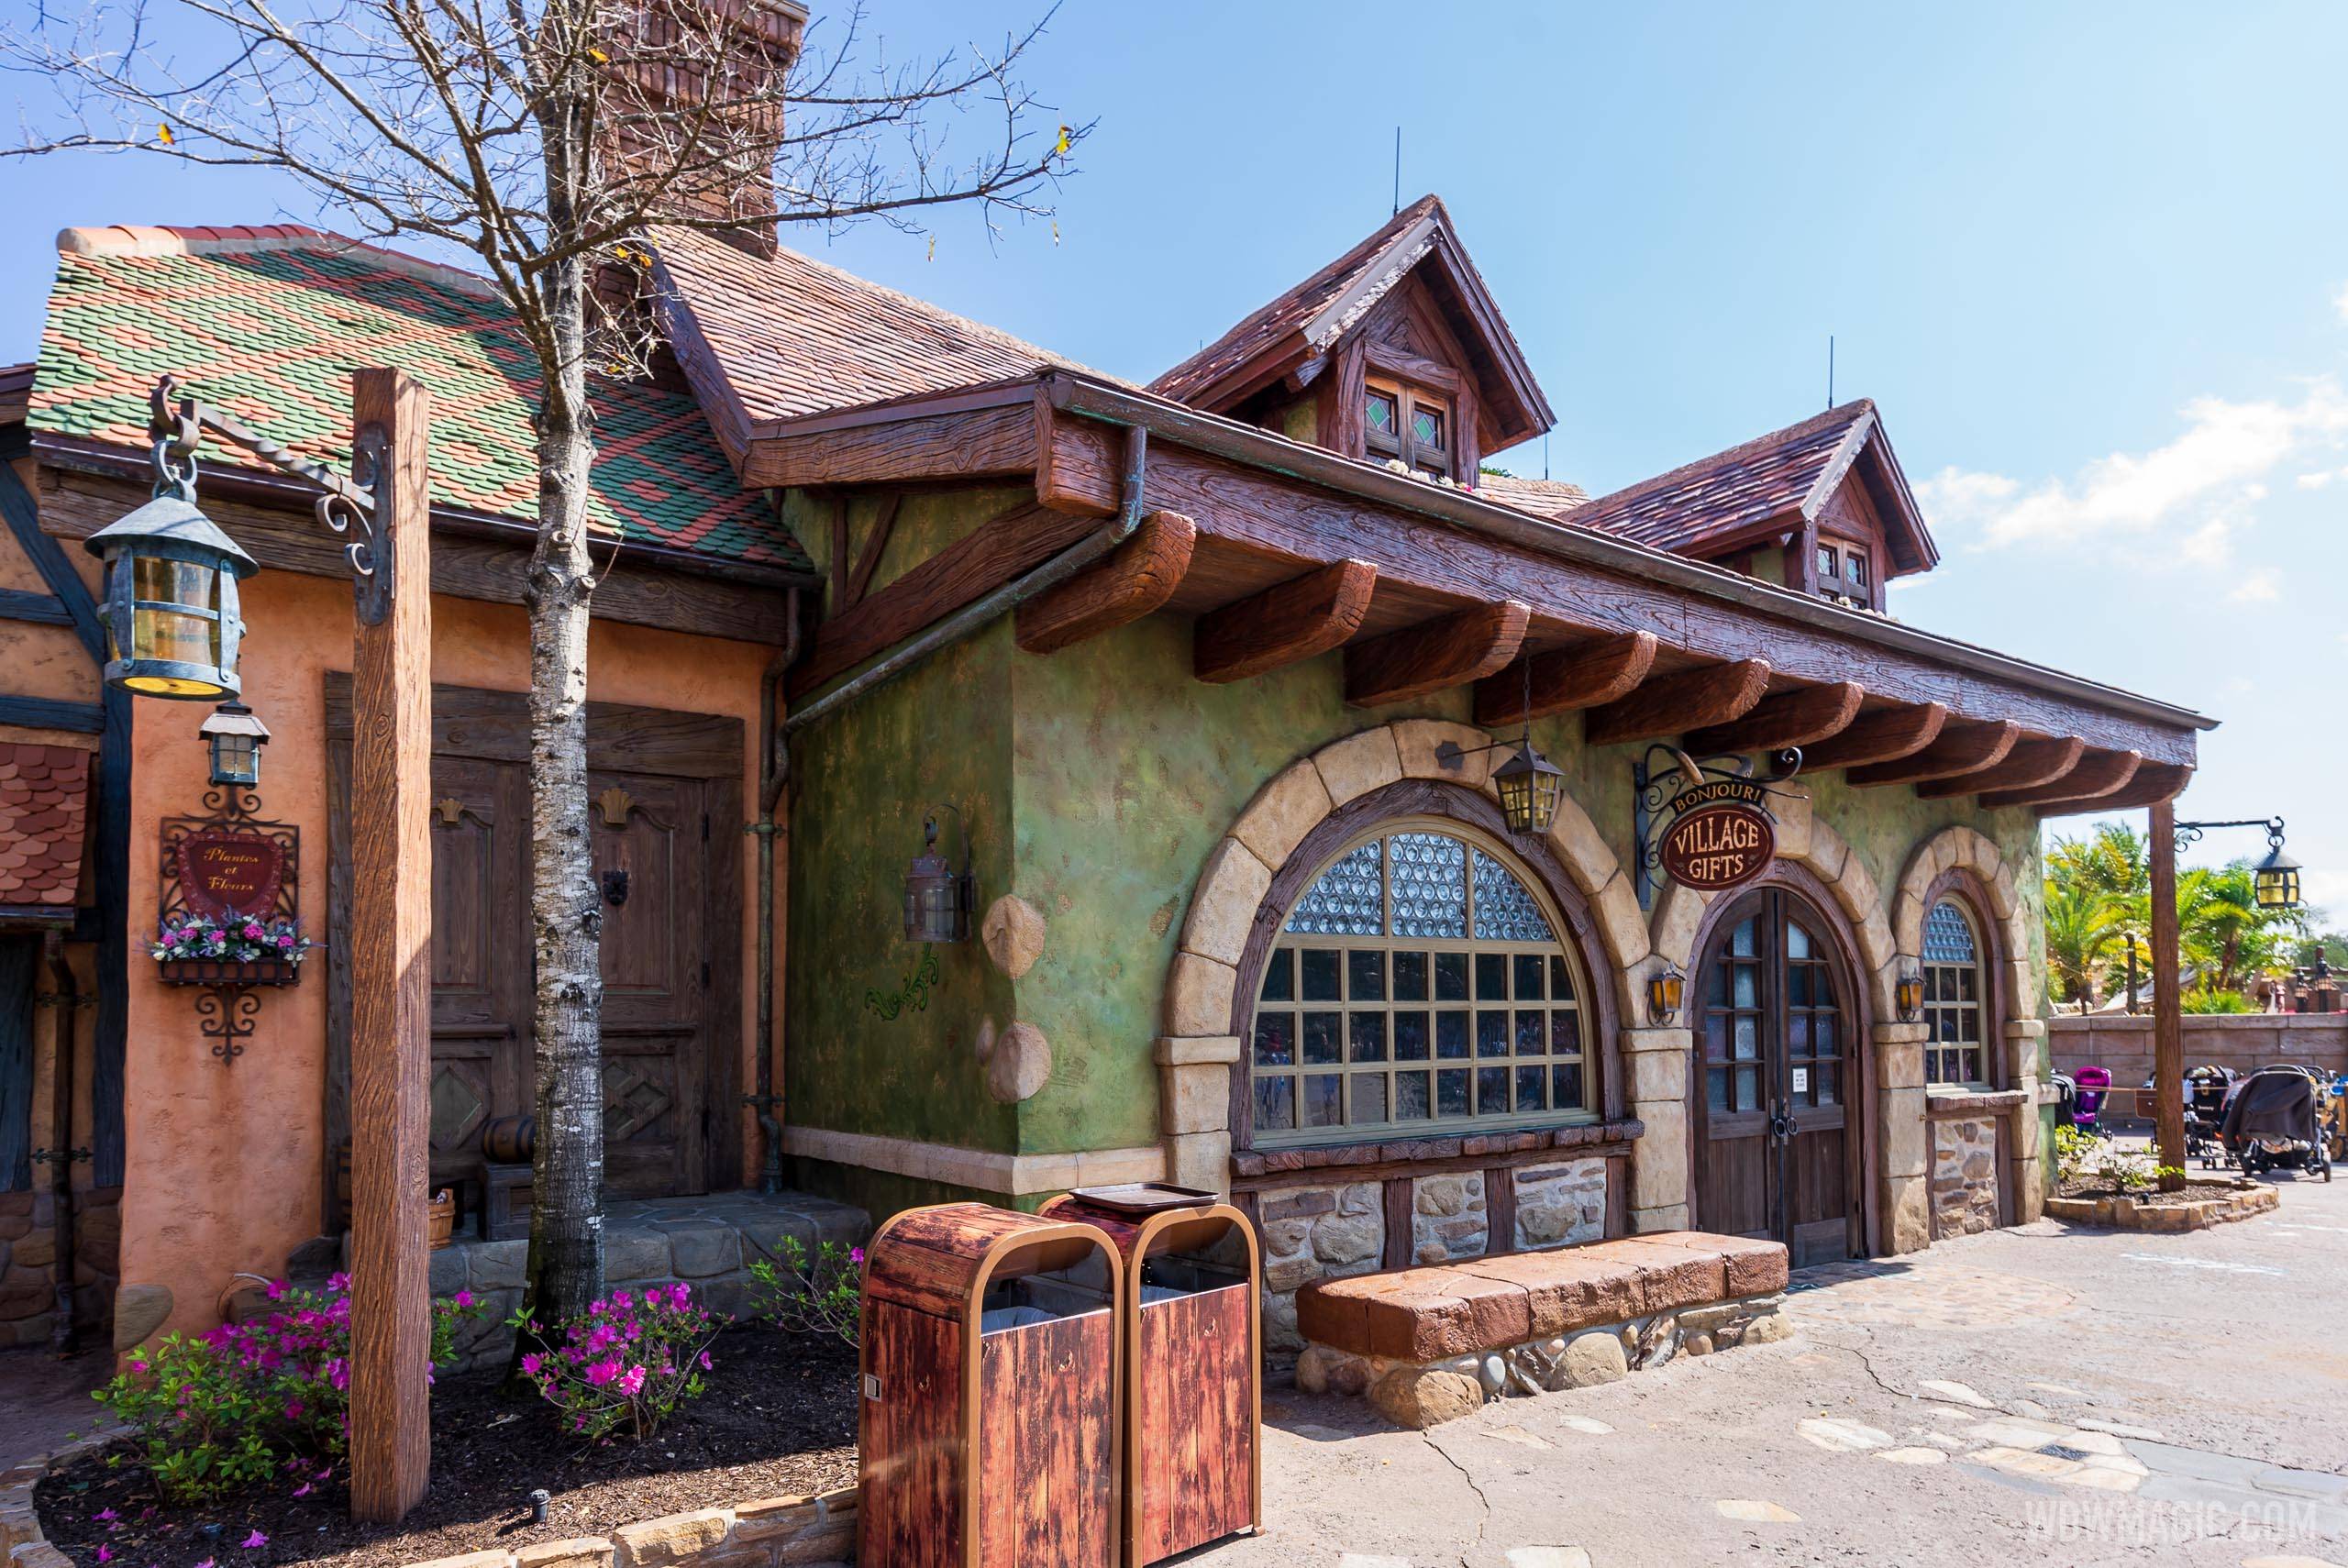 PHOTOS - The finished new-look Bonjour Village Gifts in Fantasyland